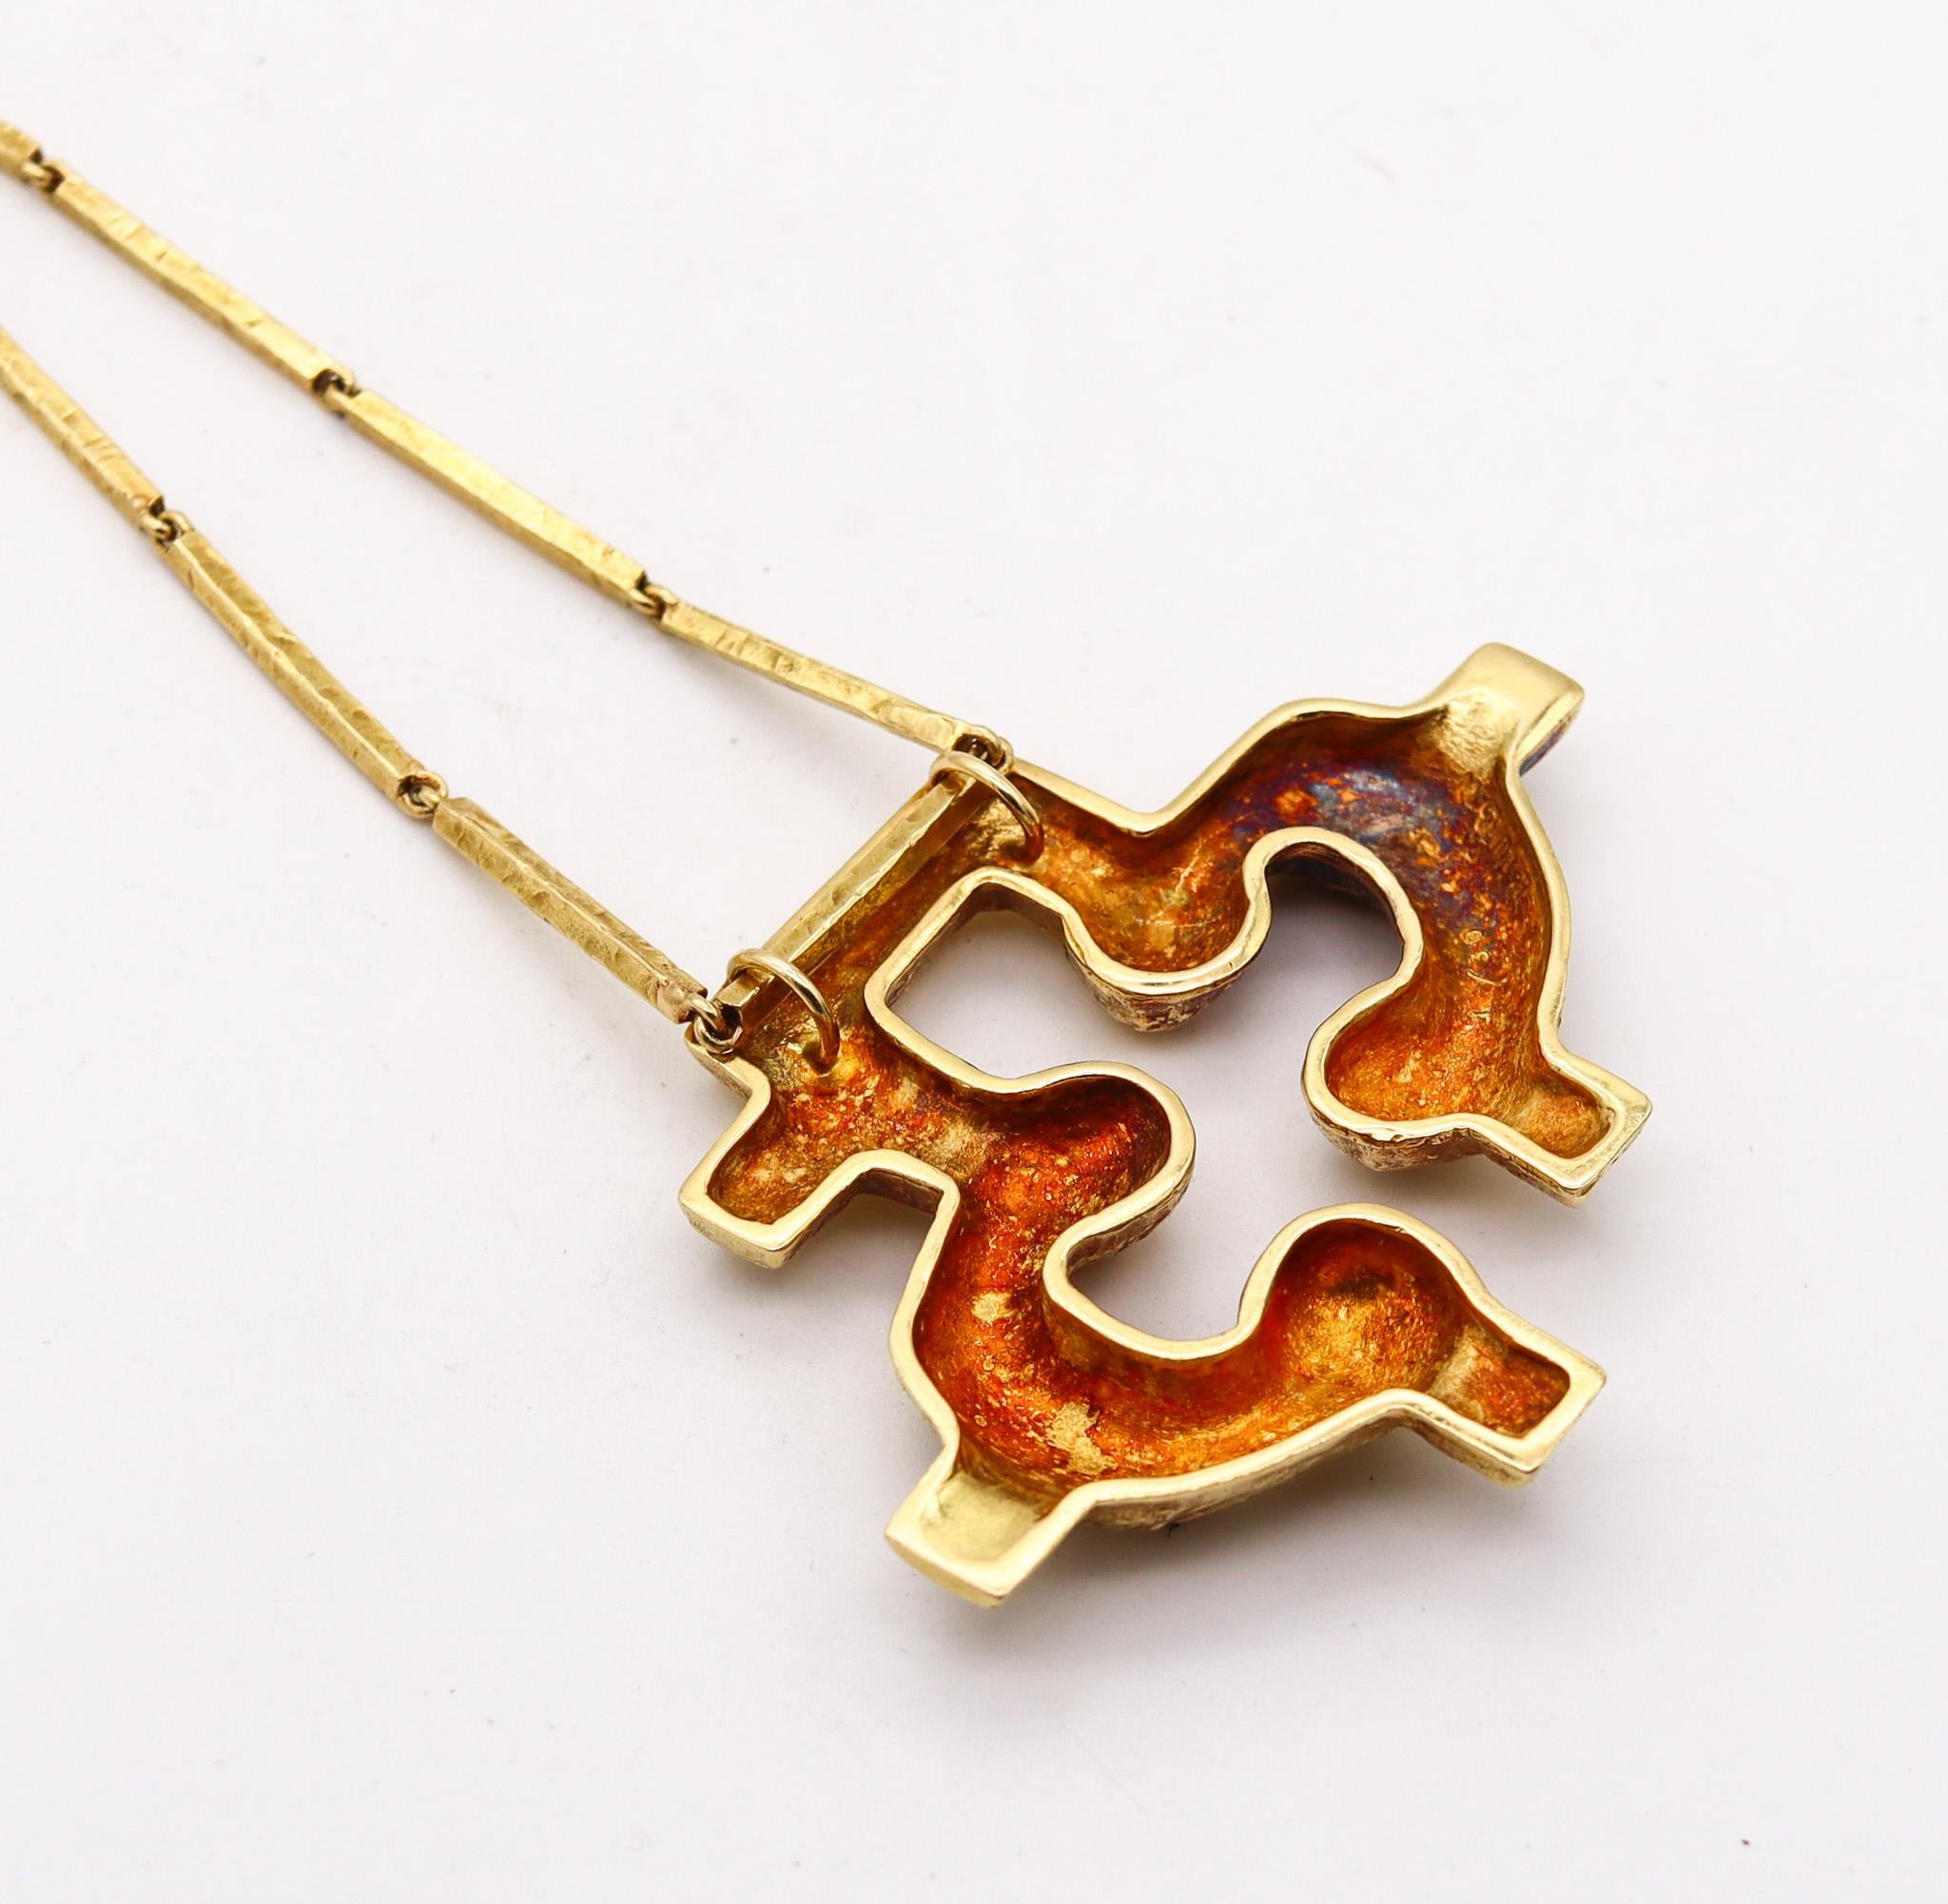 Liuba Wolf 1970 Concretism Sculptural Pendant Necklace Chain In 18Kt Yellow Gold For Sale 2